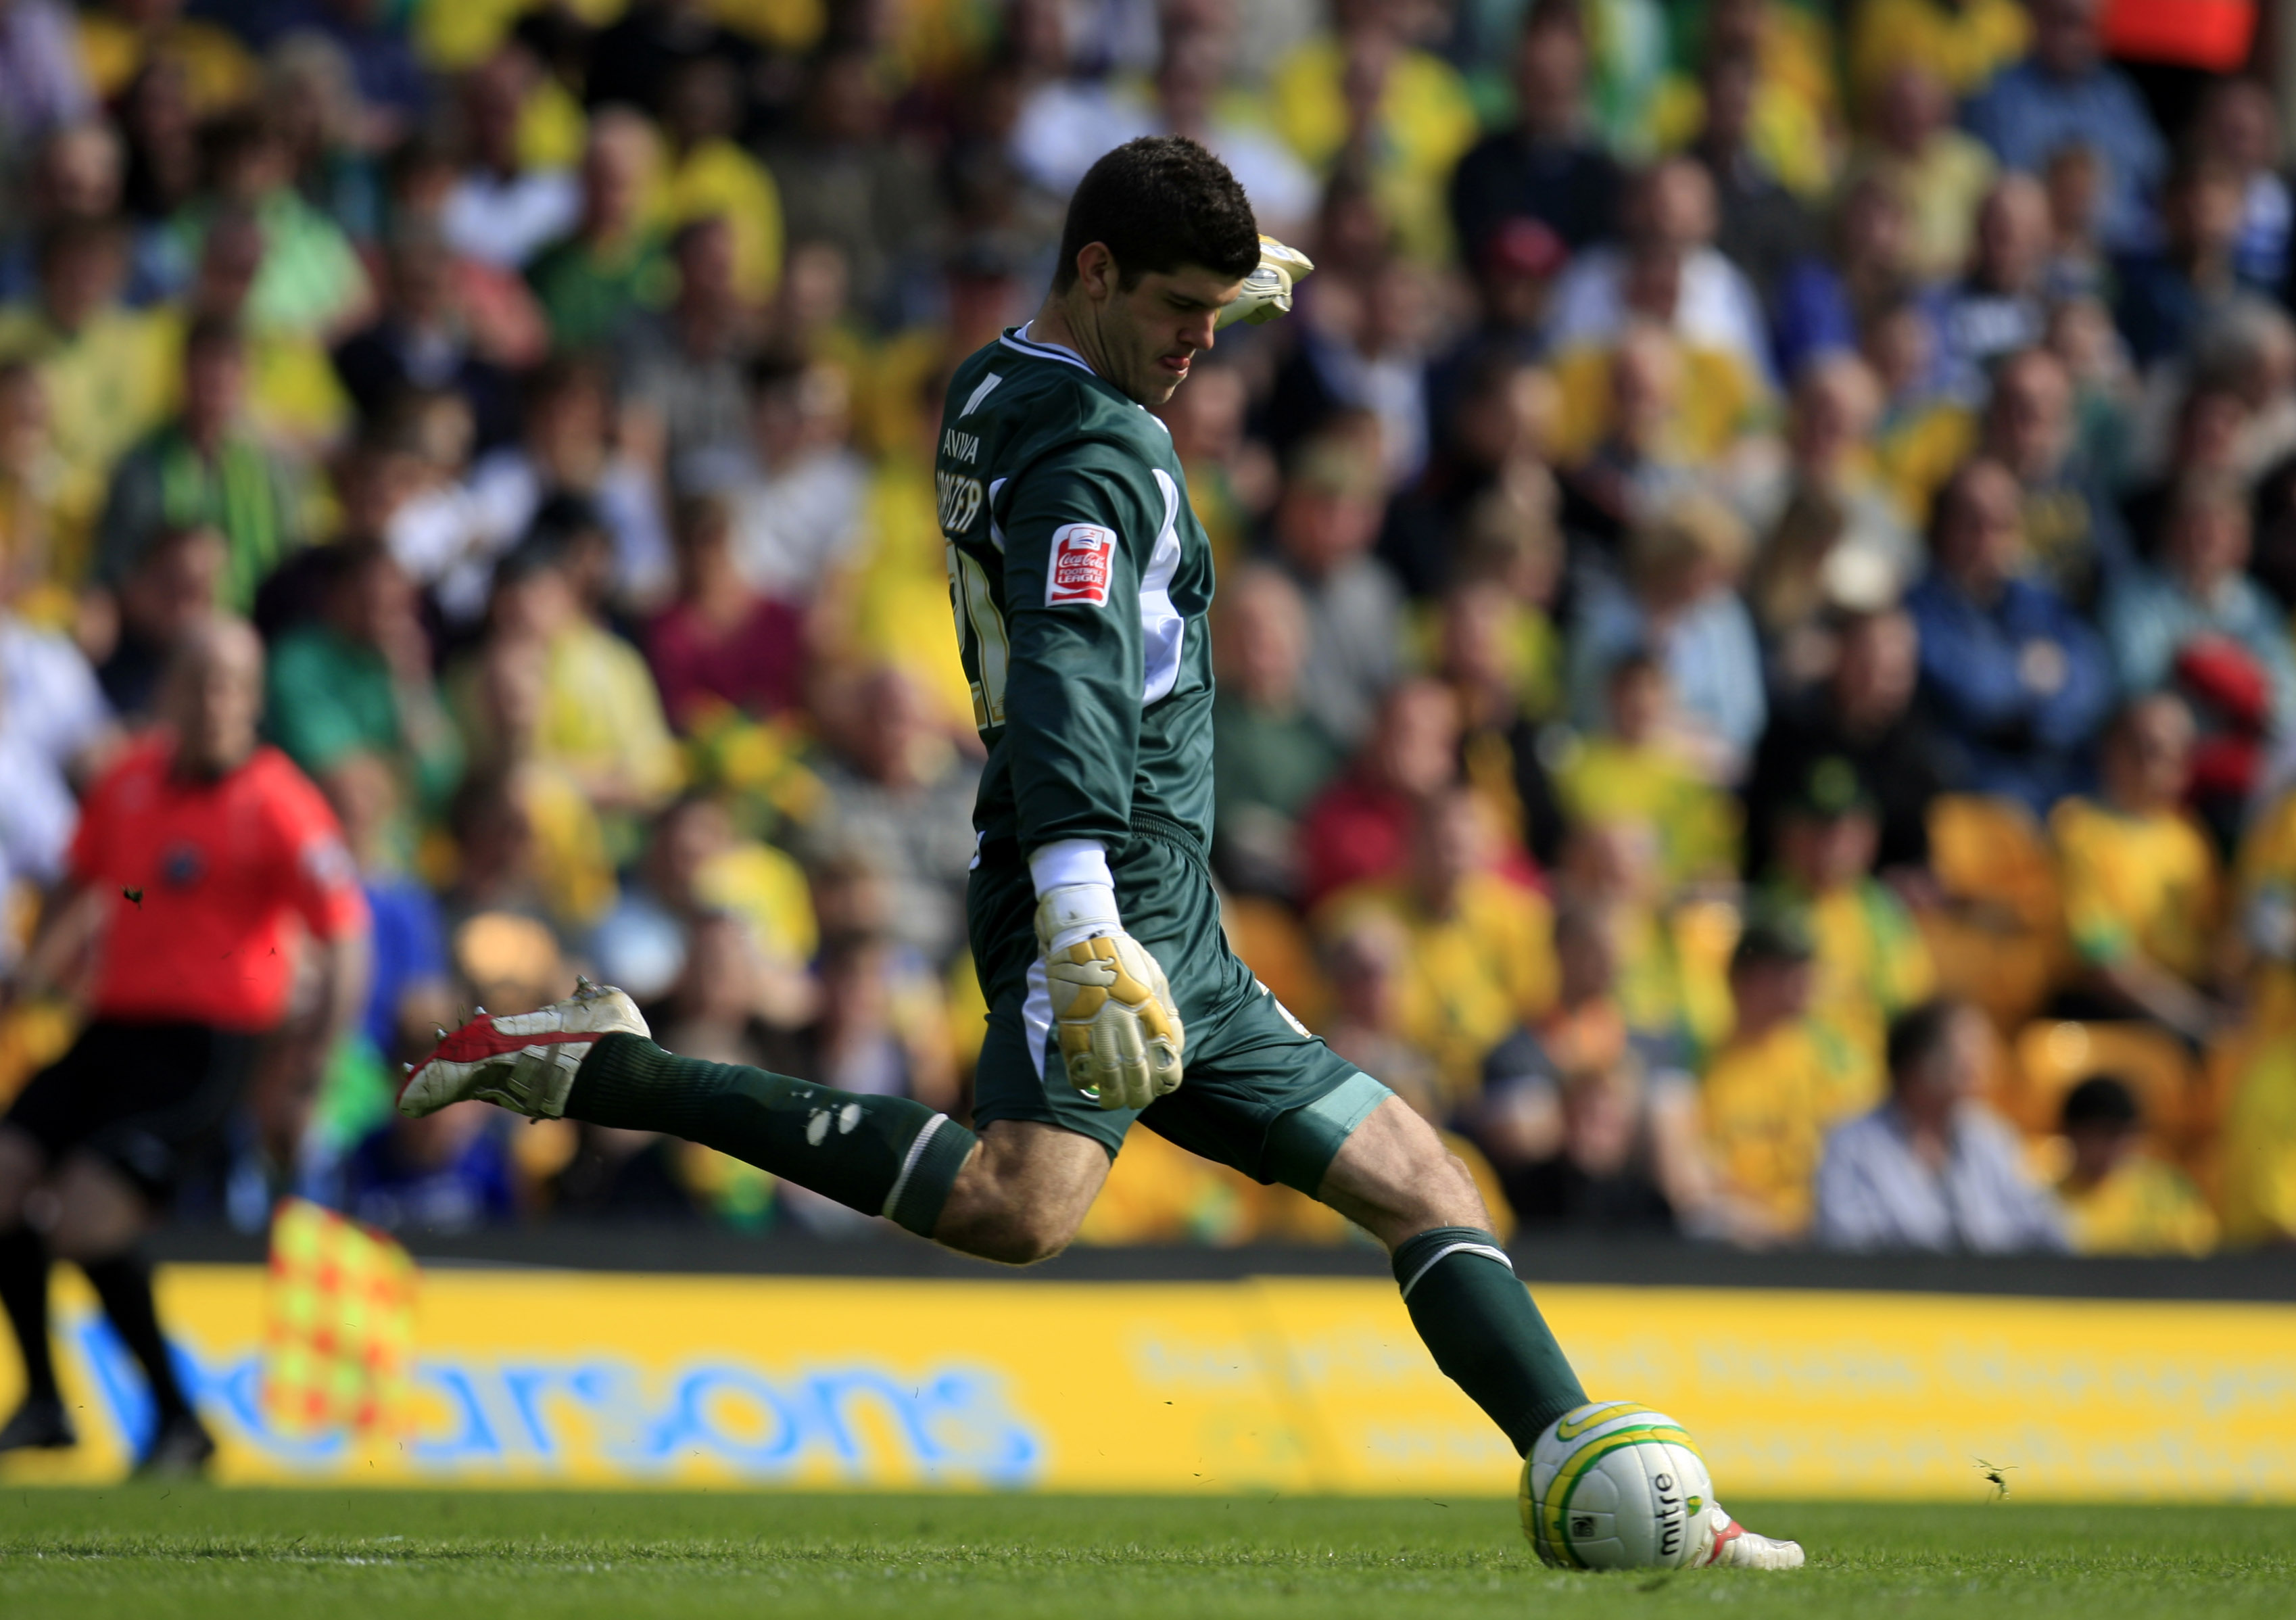 NORWICH, ENGLAND - APRIL 24:  Norwich City goalkeeper Fraser Forster during the Coca Cola League One match between Norwich City and Gillingham at Carrow Road on April 24, 2010 in Norwich, England. (Photo by Jed Leicester/Getty Images)